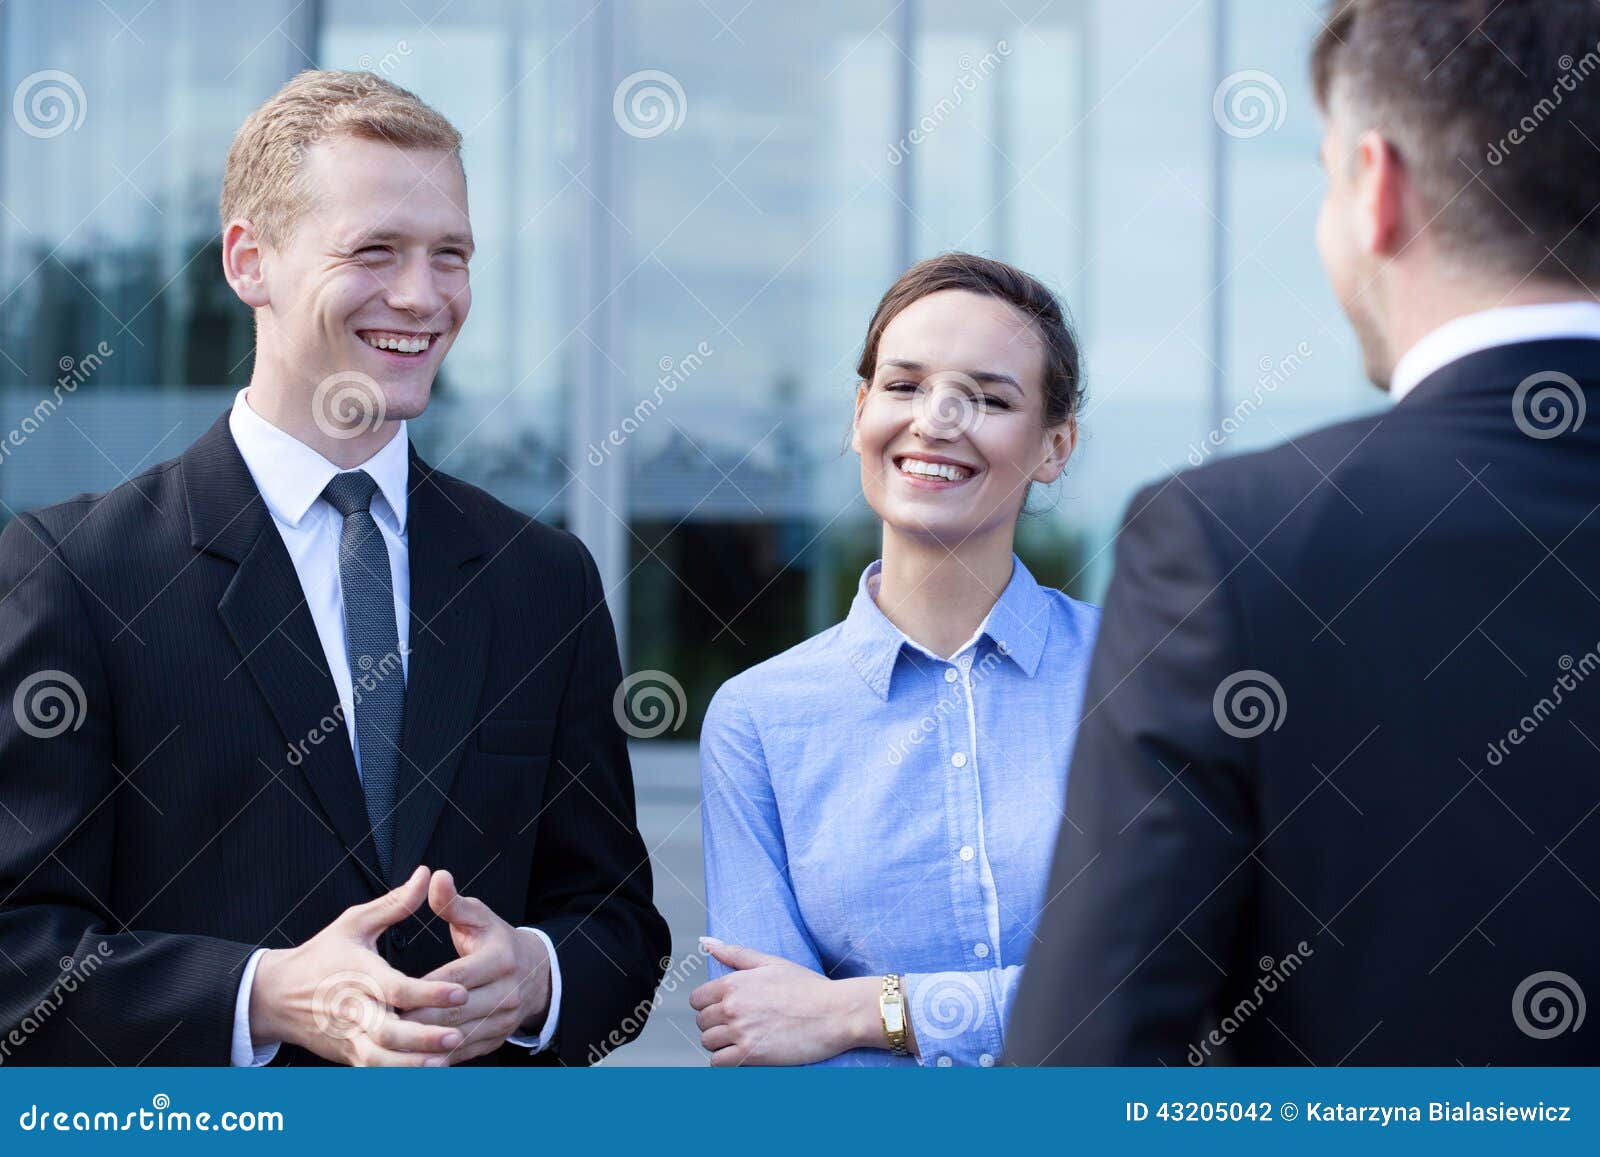 business people during small talk